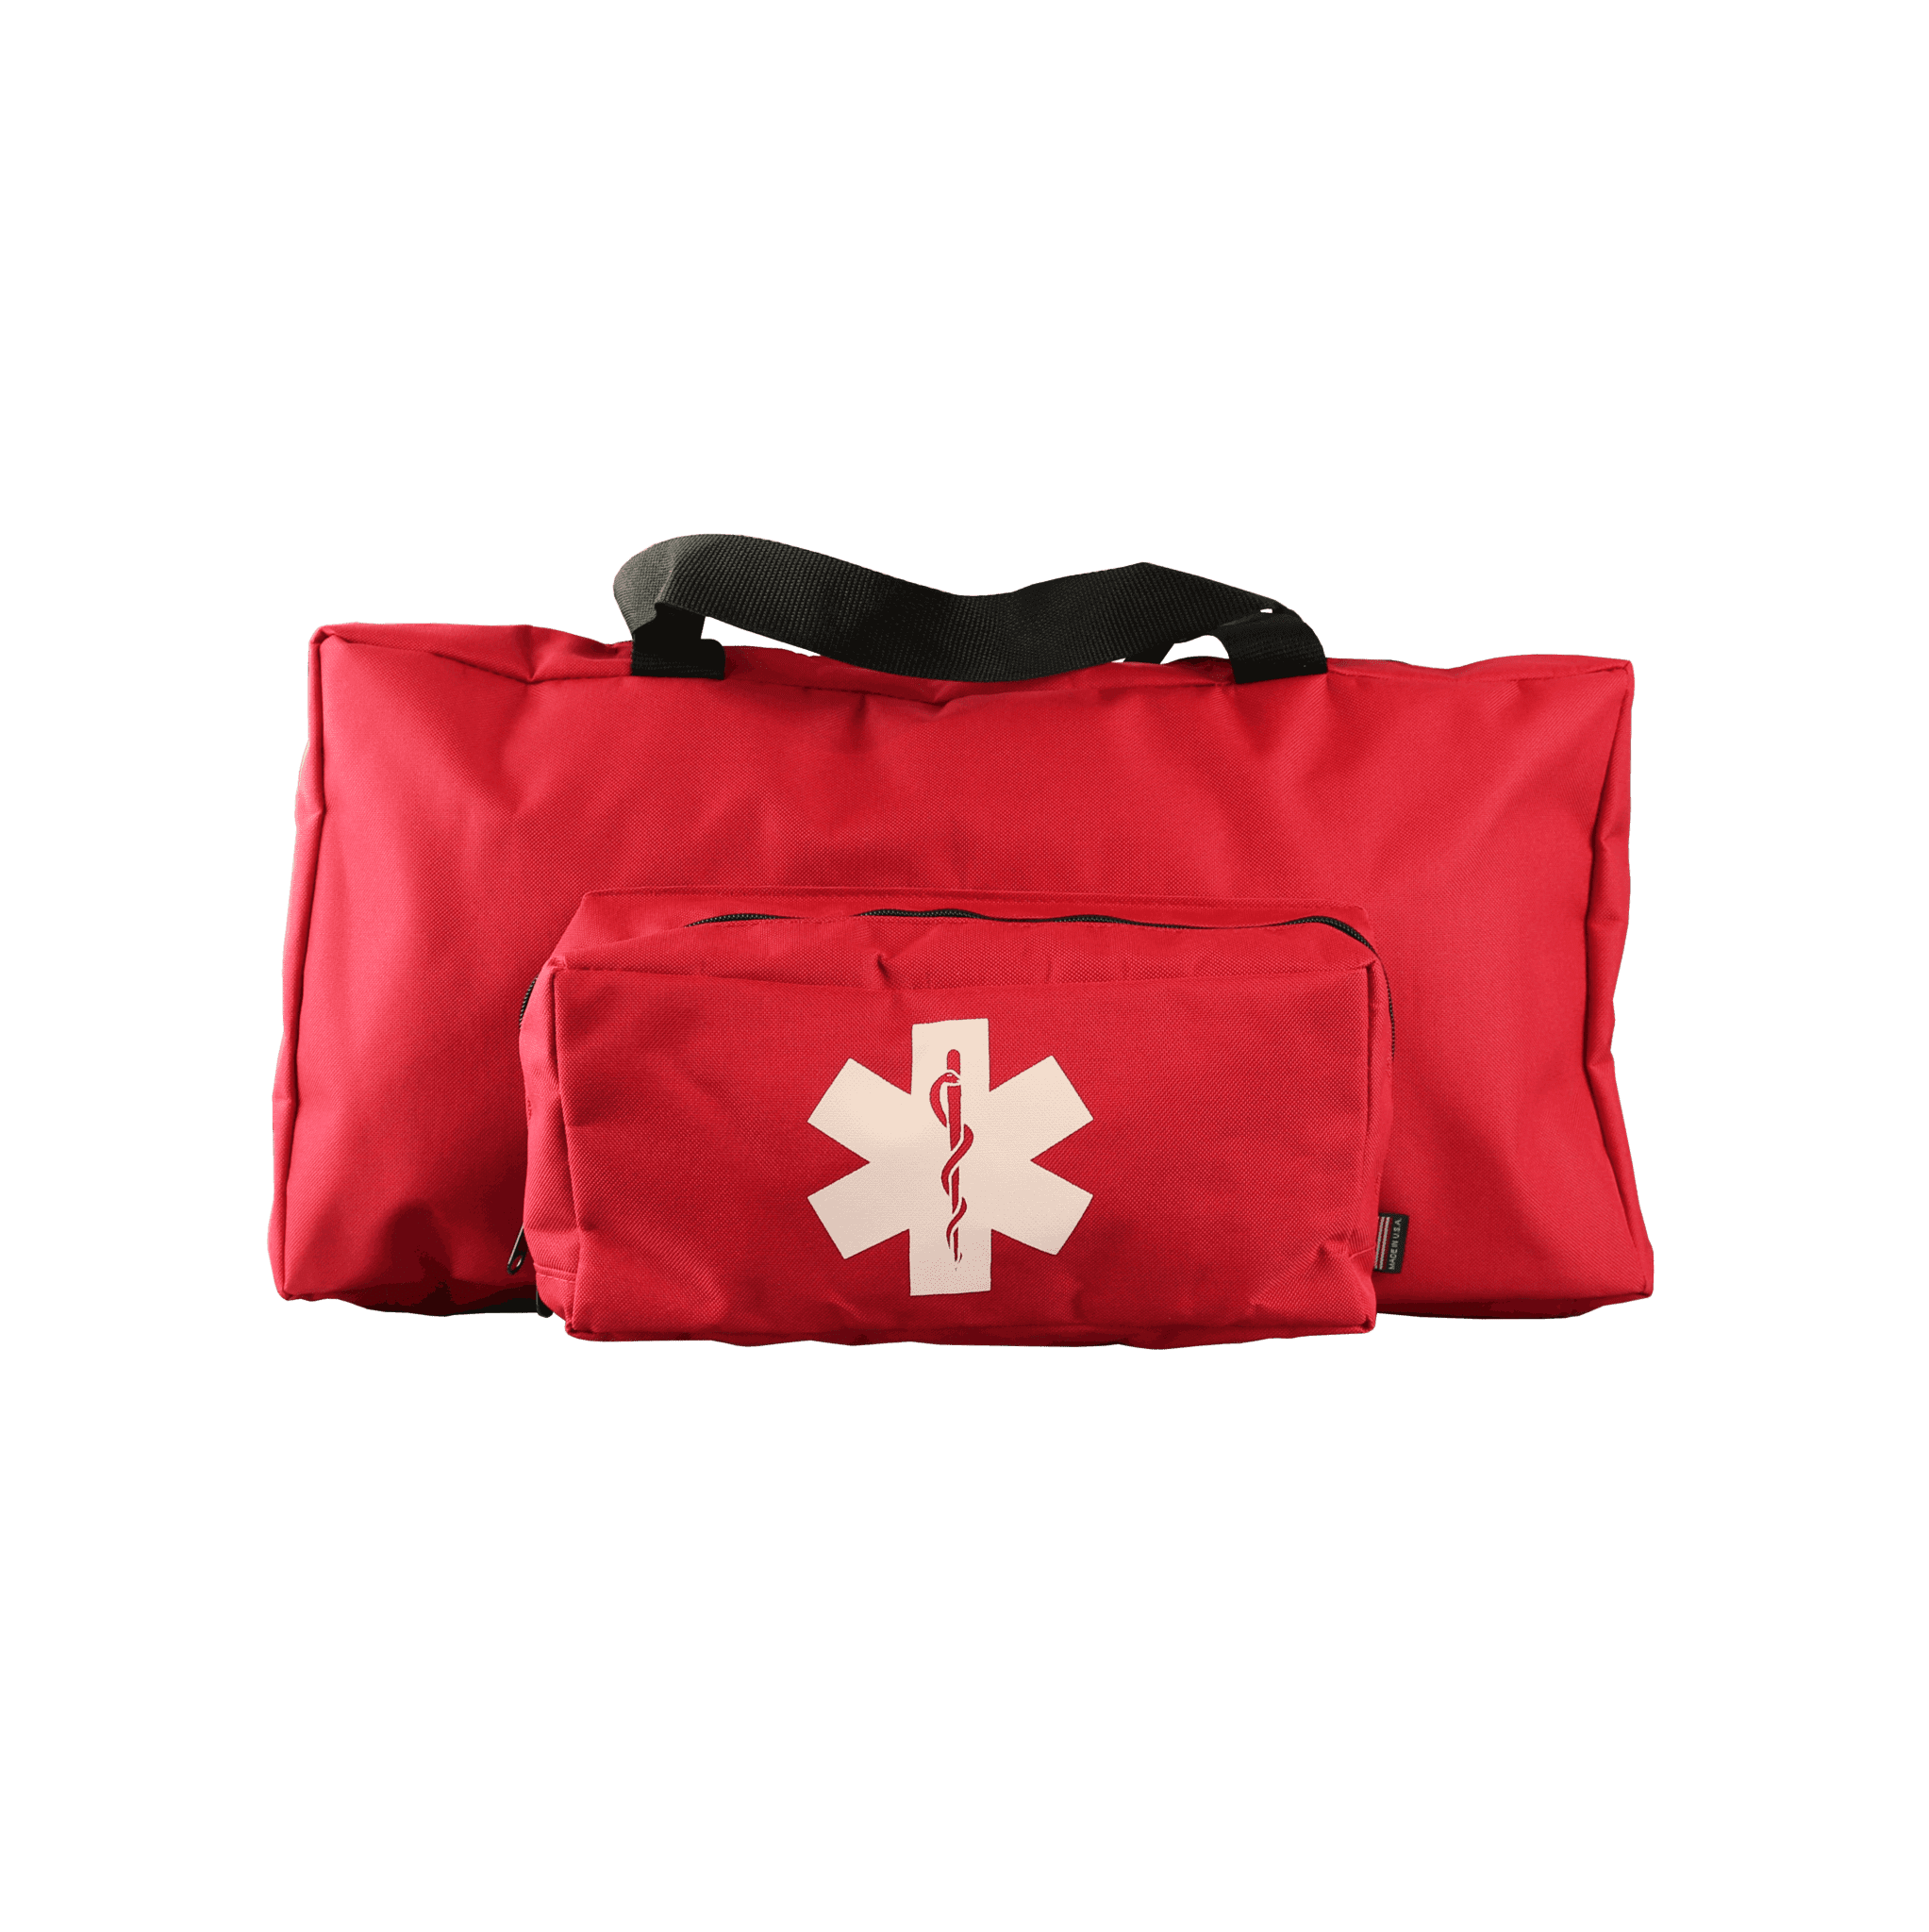 Waterproof, Indestructible, Adventure First Aid Kit - Large